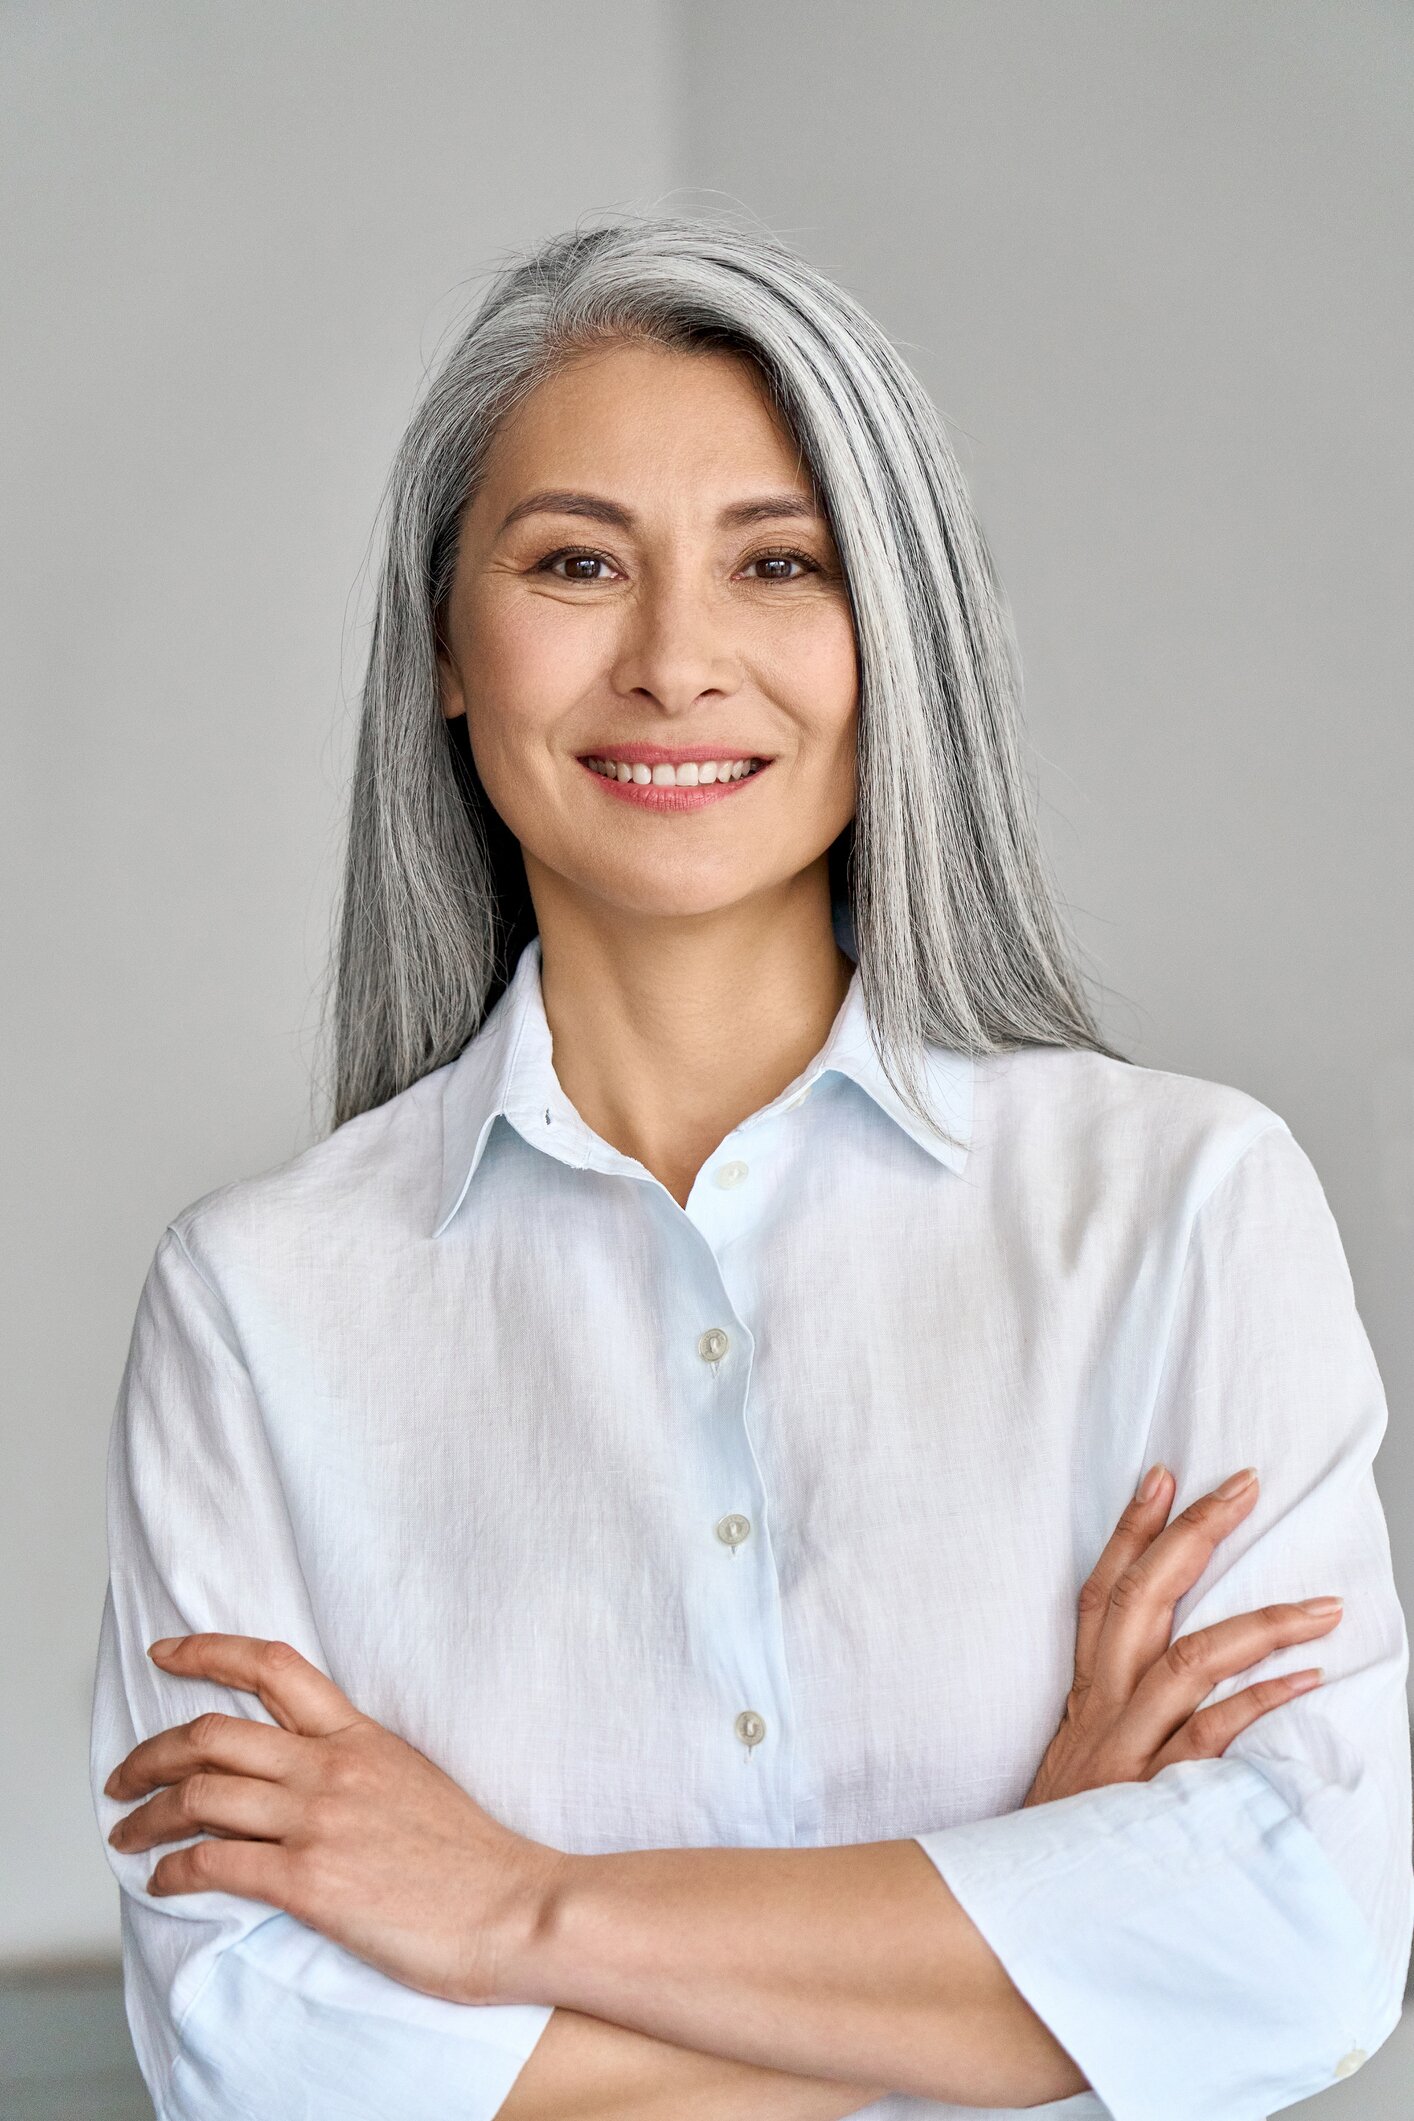 Beverly Hills root canal therapy model with grey hair